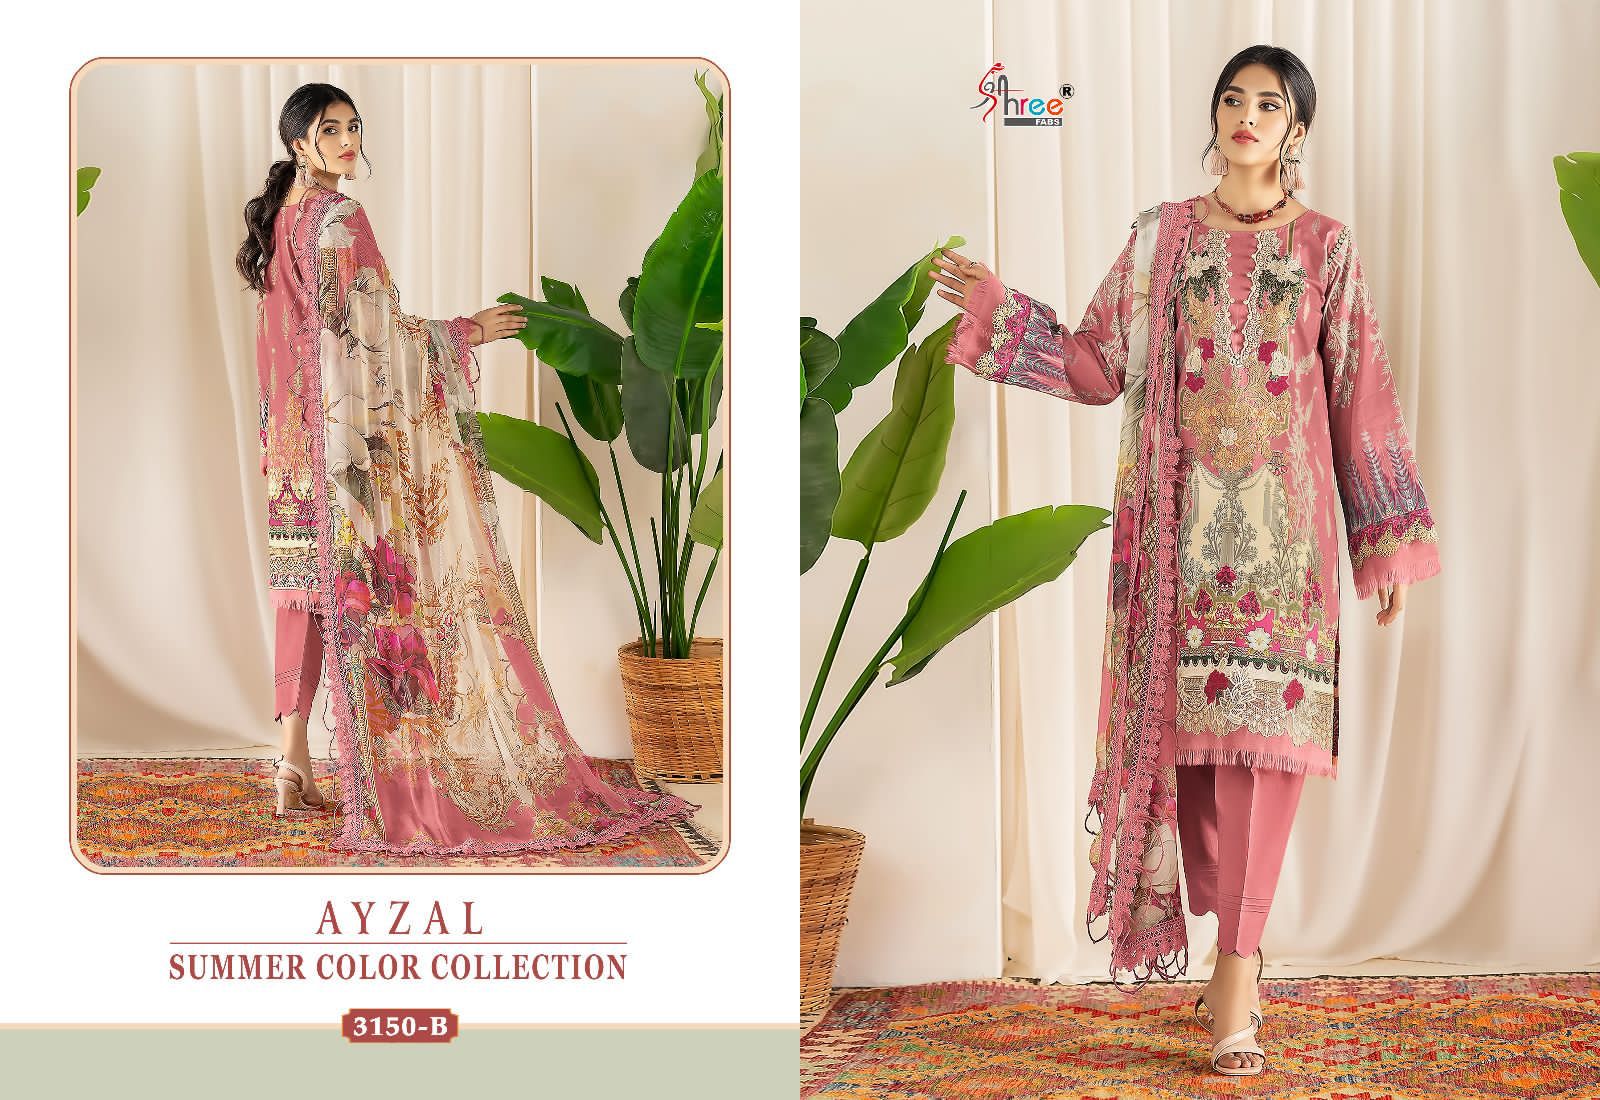 SHREE FABS 3150 B AYZAL SUMMER COLOUR COLLECTION PAKISTANI SUITS